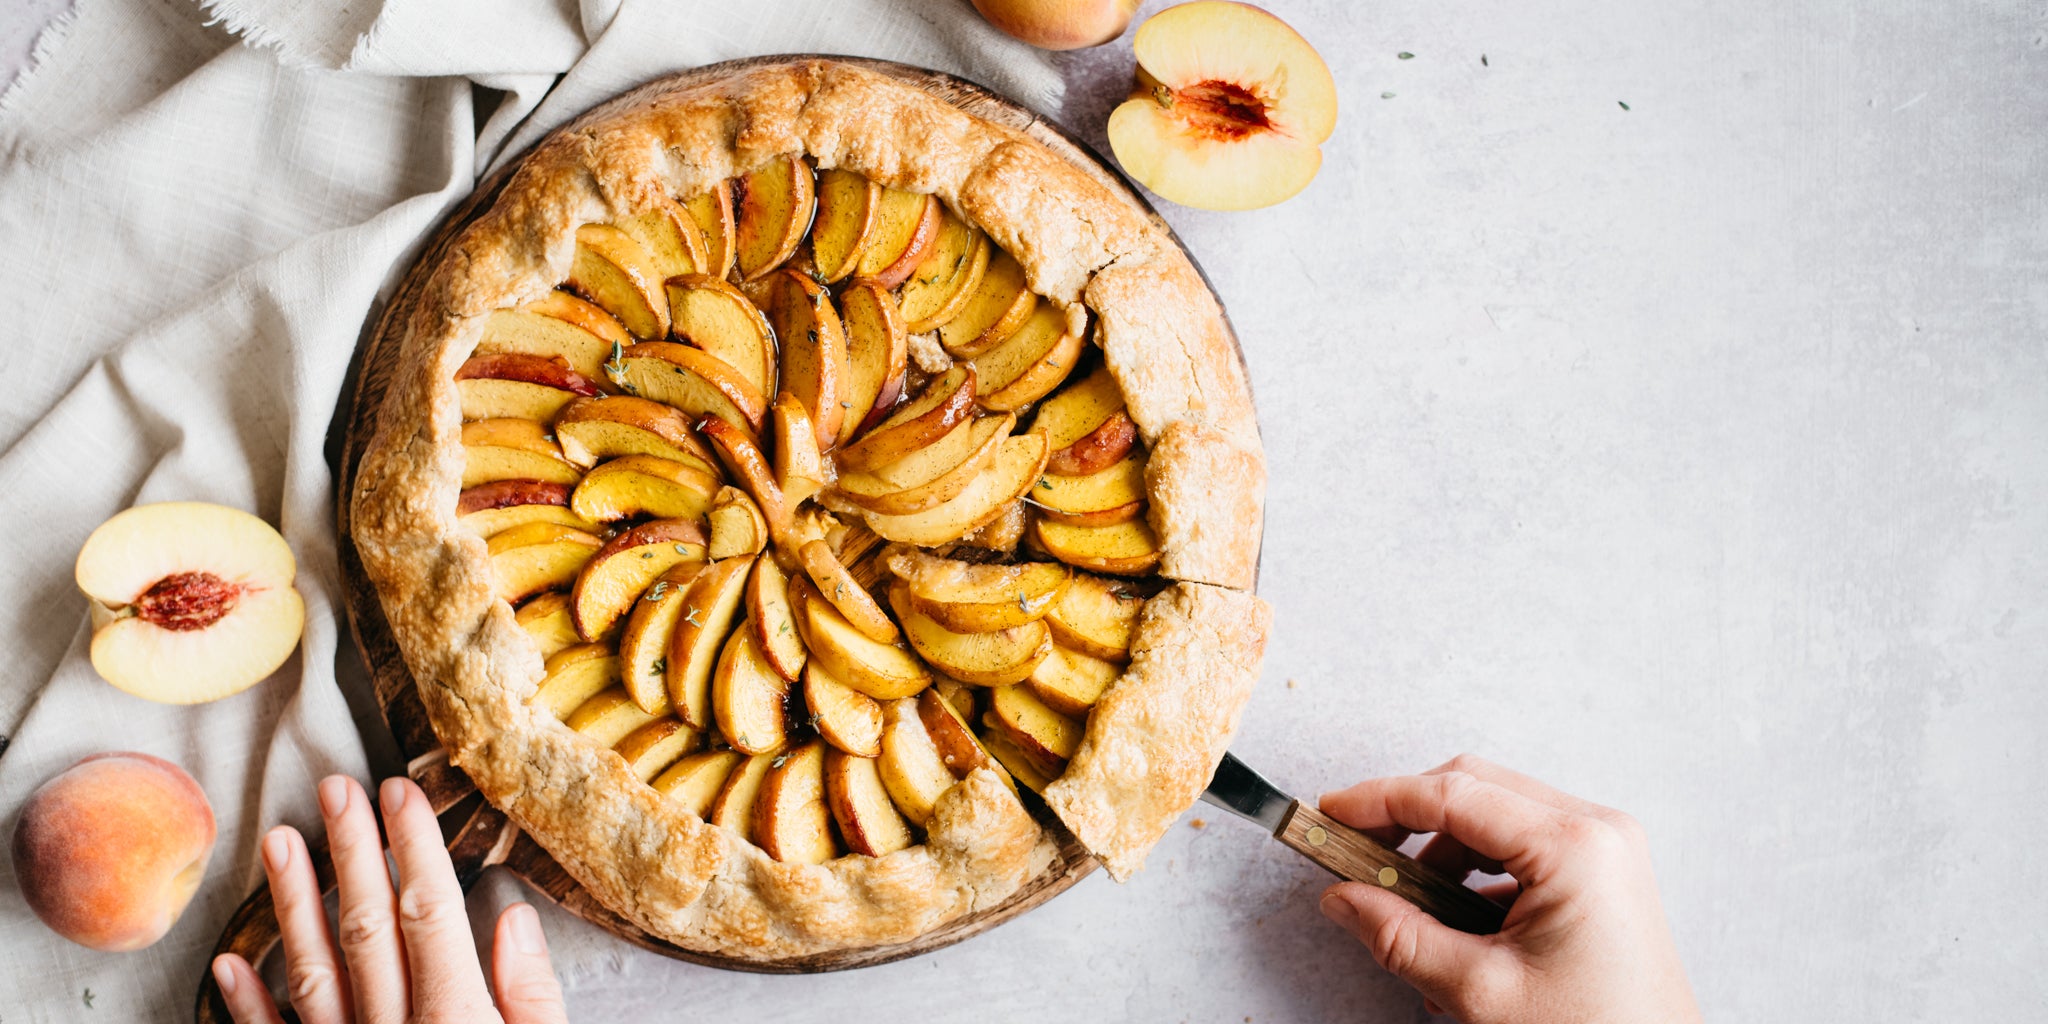 Hand removing a slice of the galette with a cake knife and peaches beside